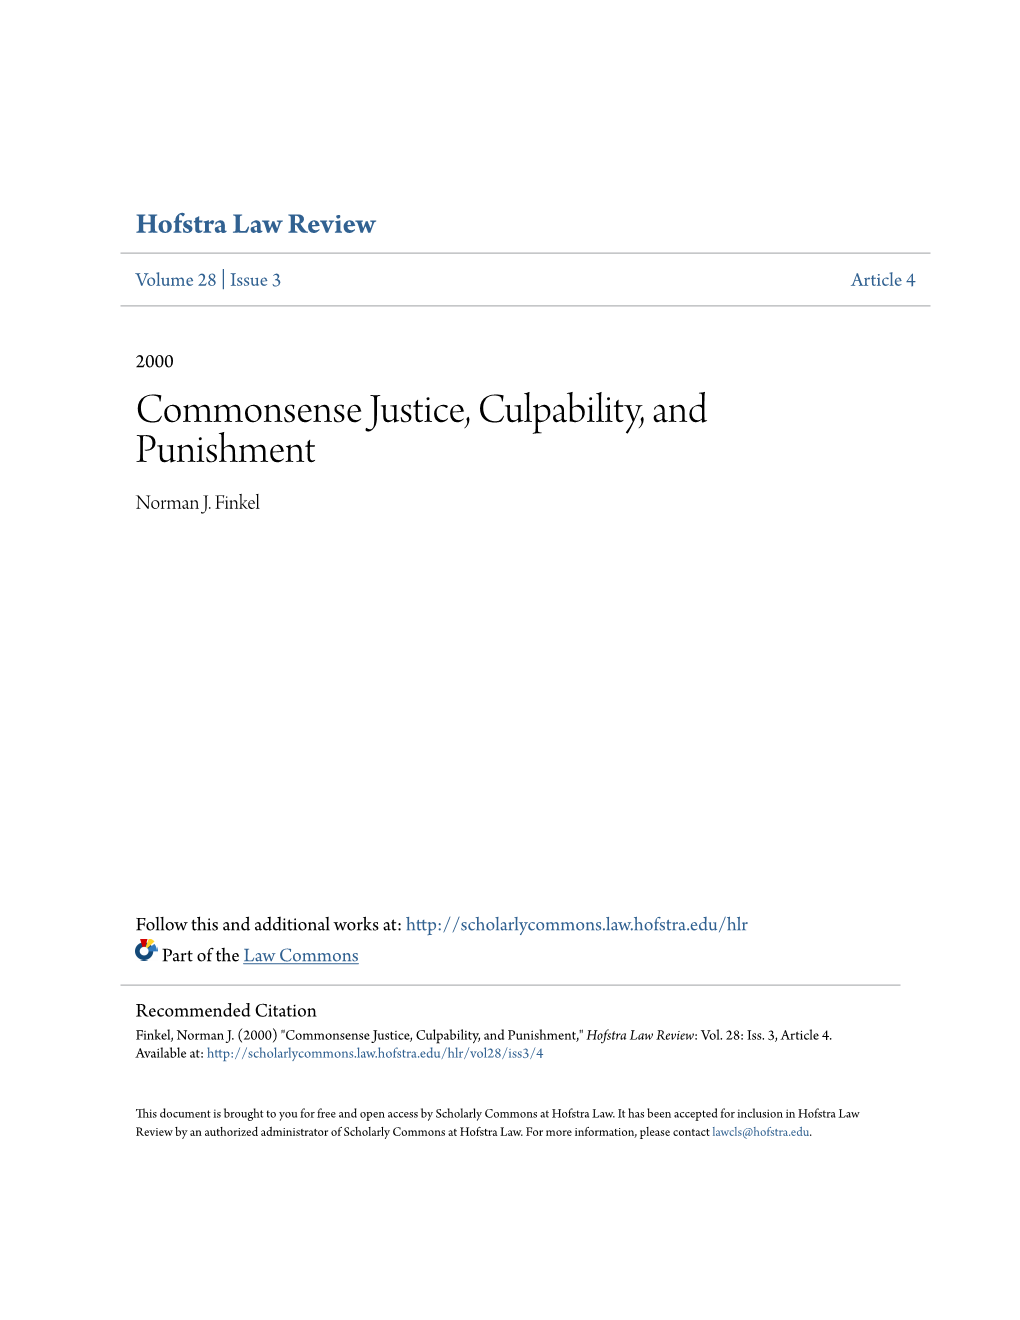 Commonsense Justice, Culpability, and Punishment Norman J